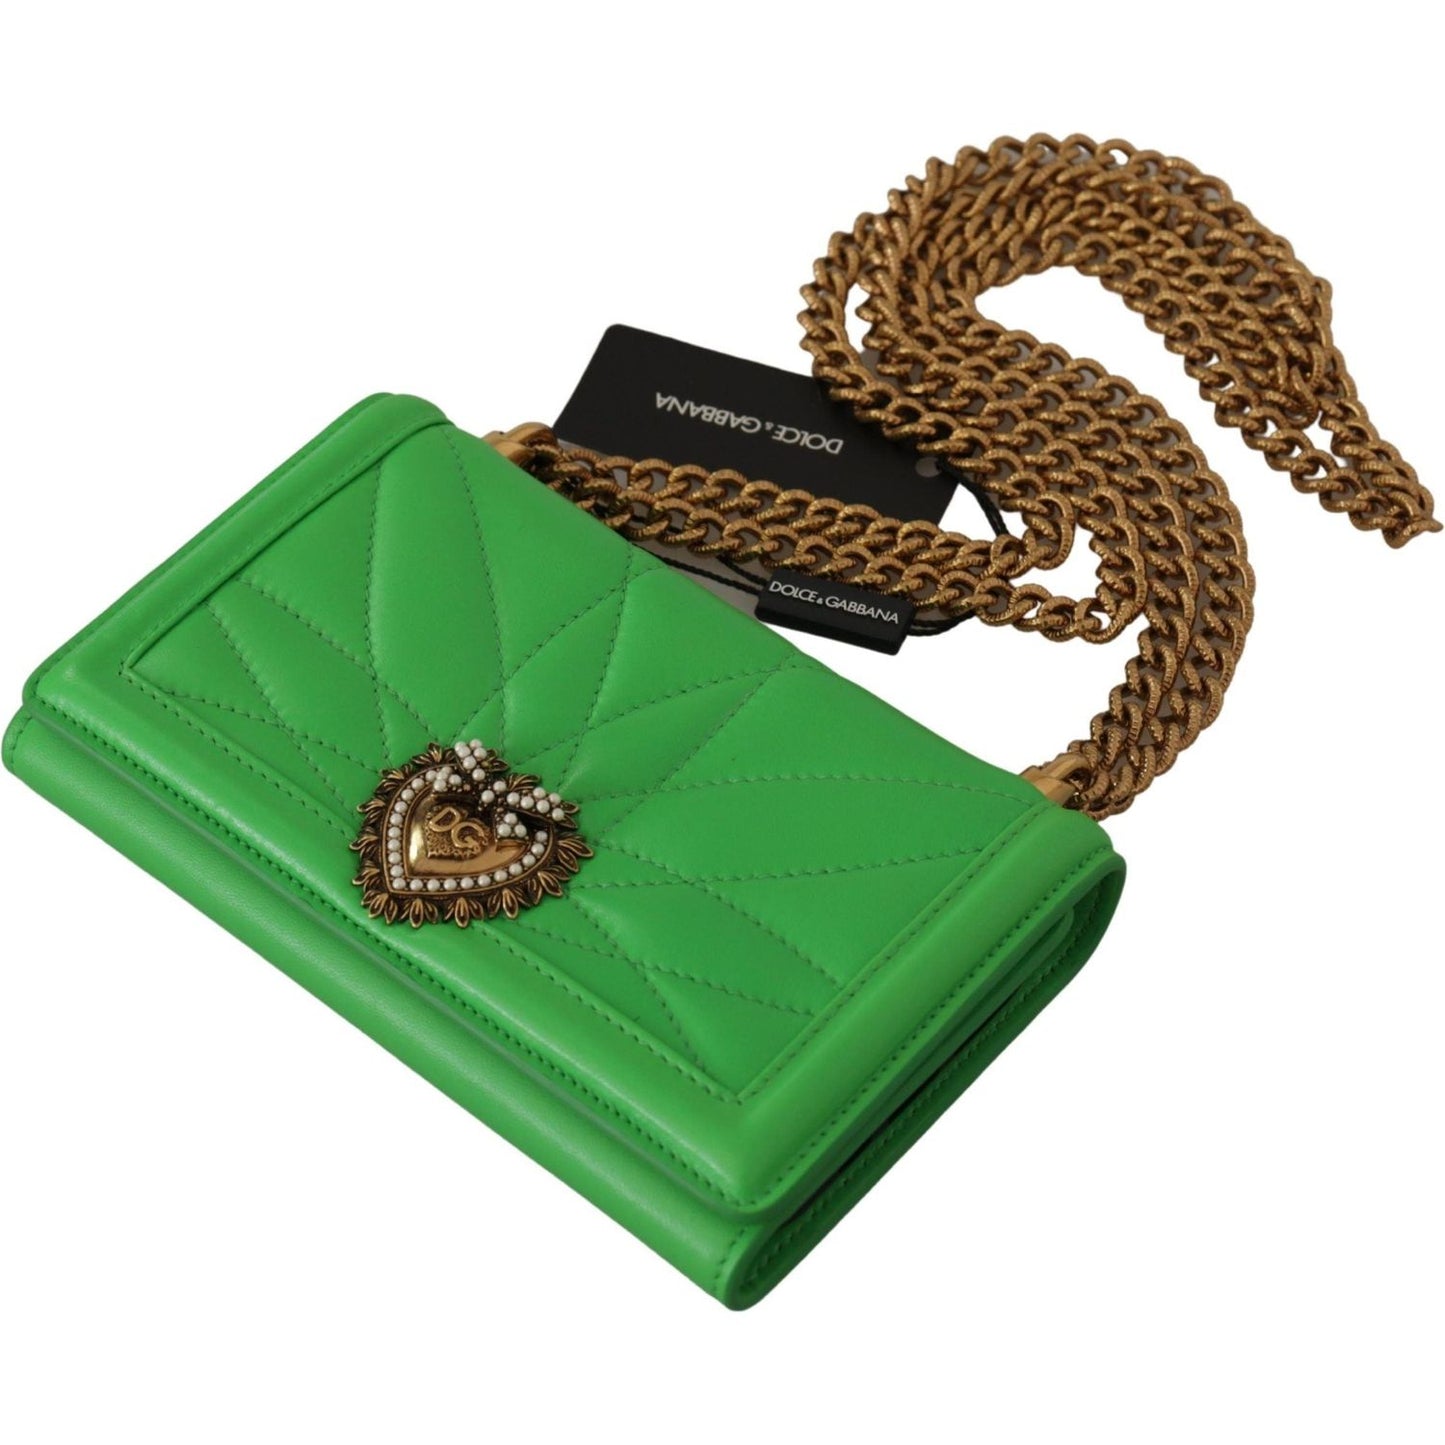 Dolce & Gabbana Elegant Leather iPhone Wallet Case with Chain green-leather-devotion-cardholder-iphone-11-pro-wallet